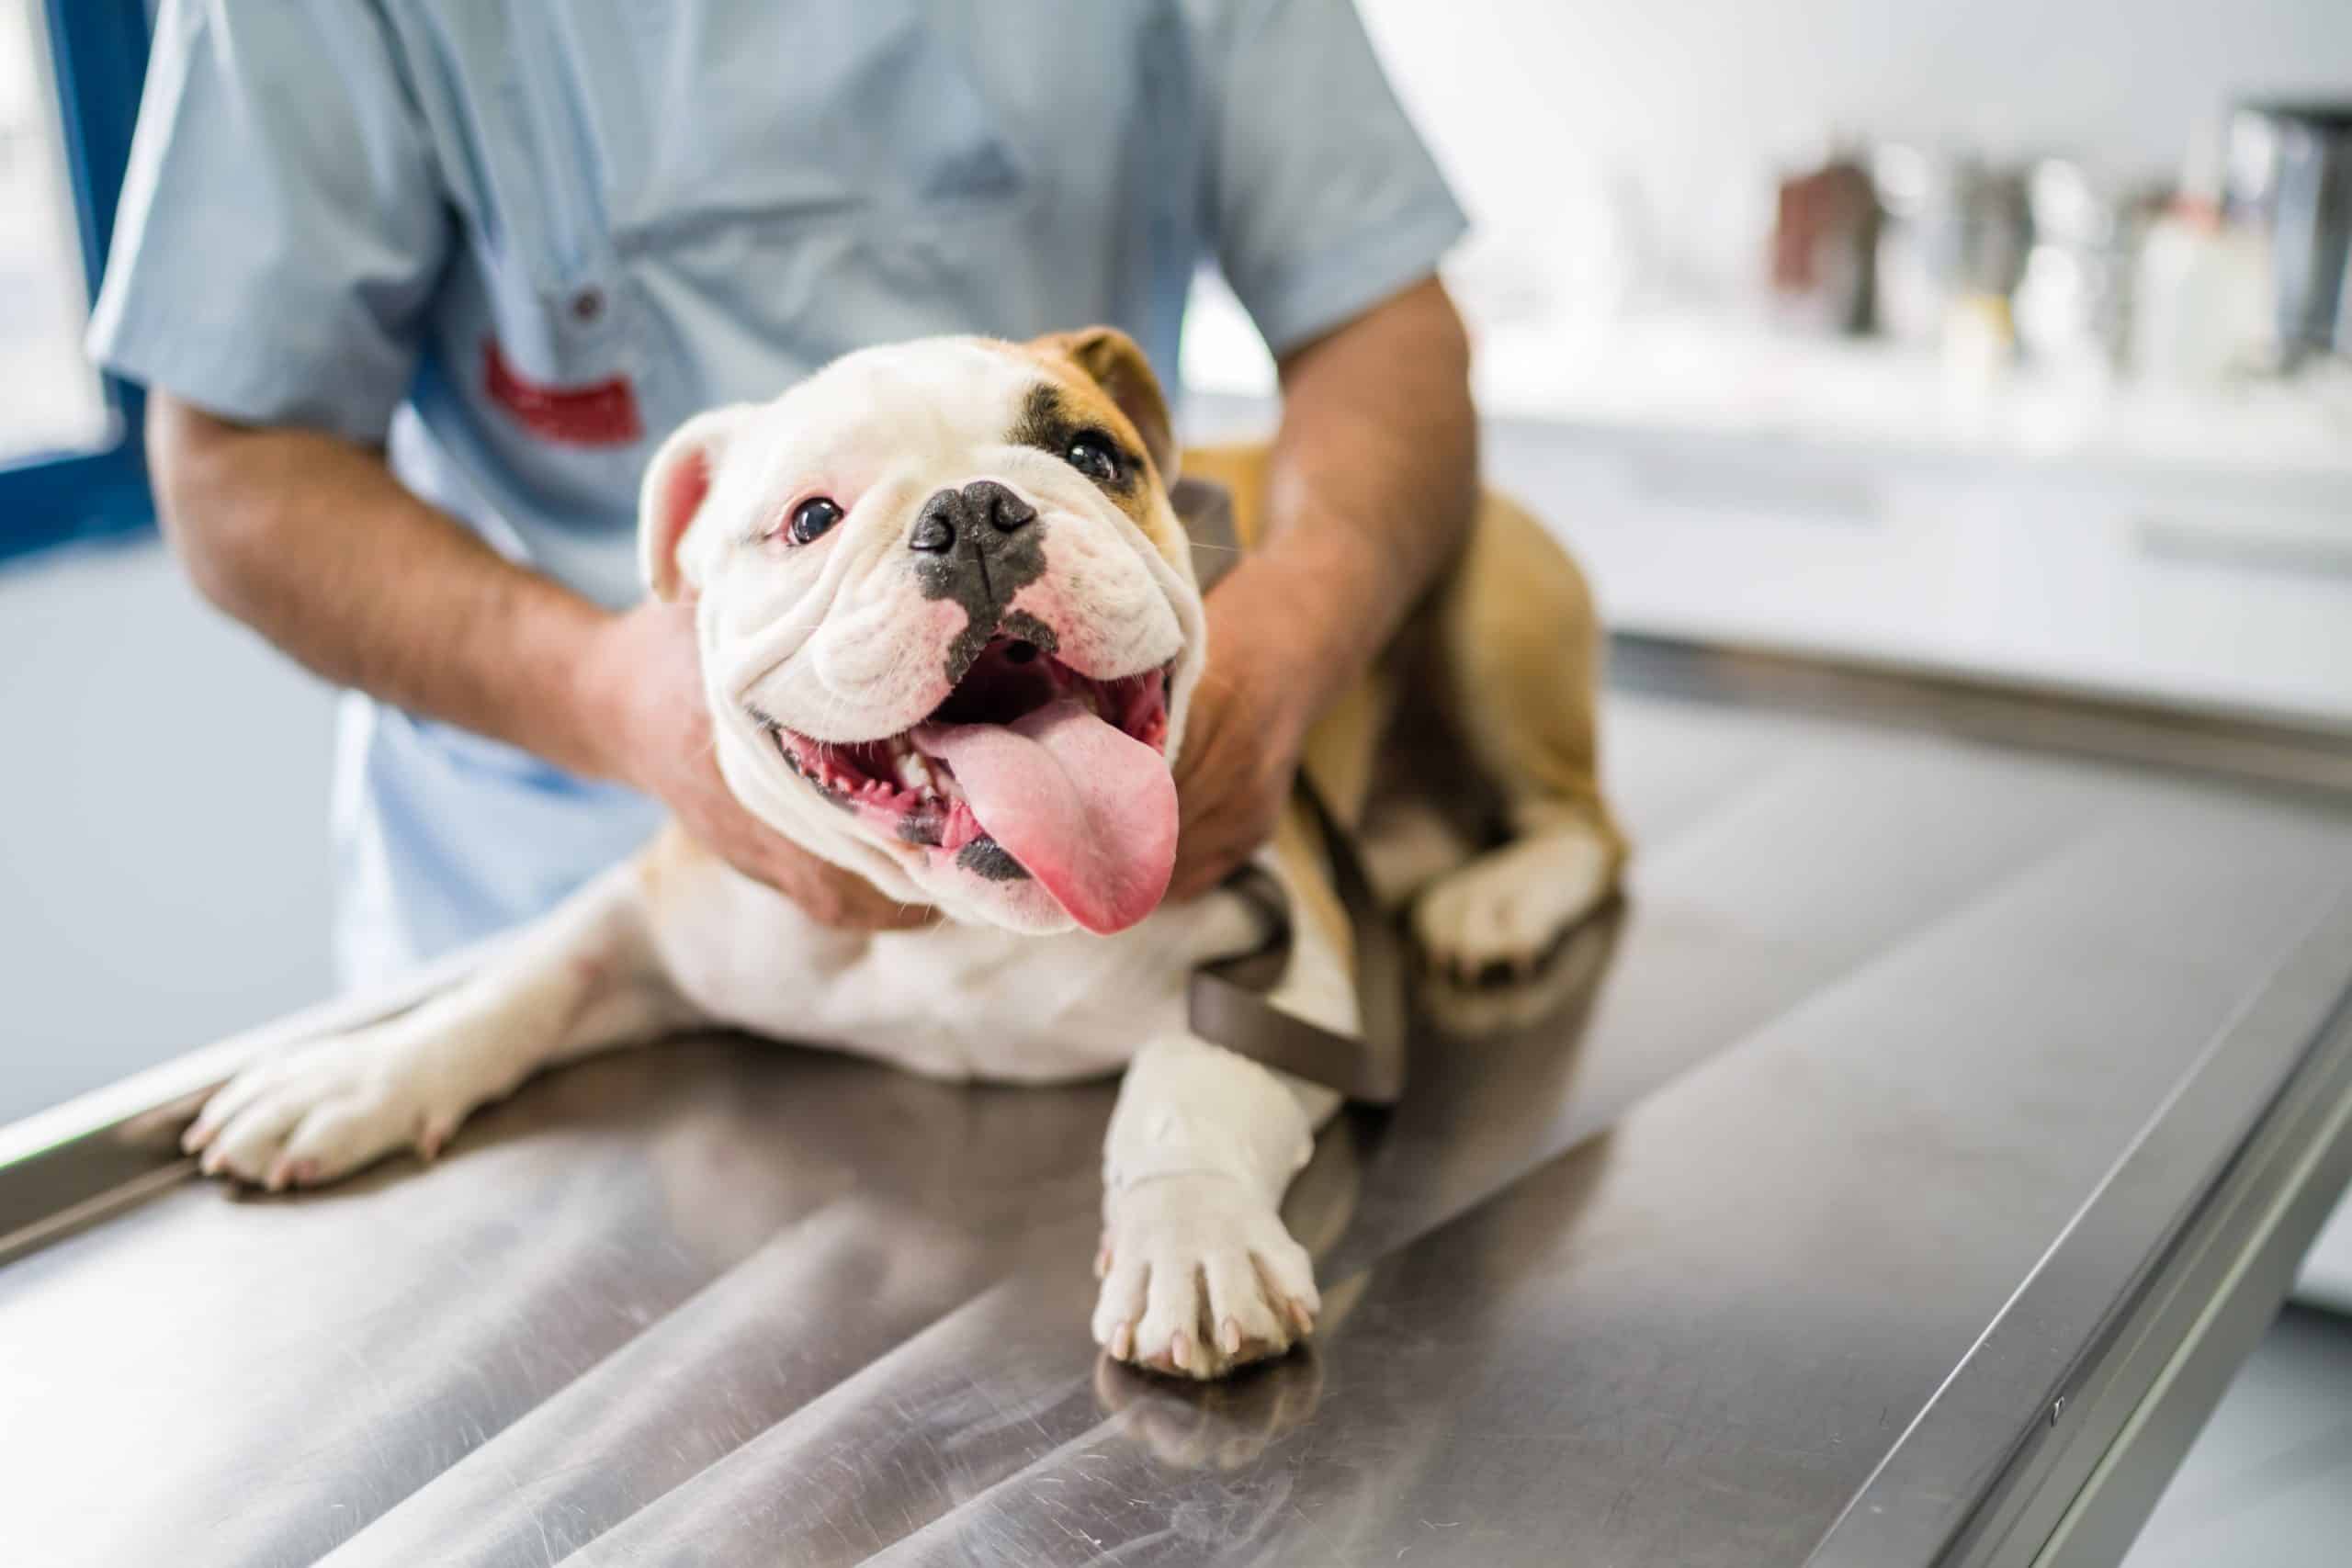 Happy bulldog puppy gets vet exam. When choosing pet health insurance plans, consider premiums, deductibles, whether the plan covers diagnostic testing, and more.